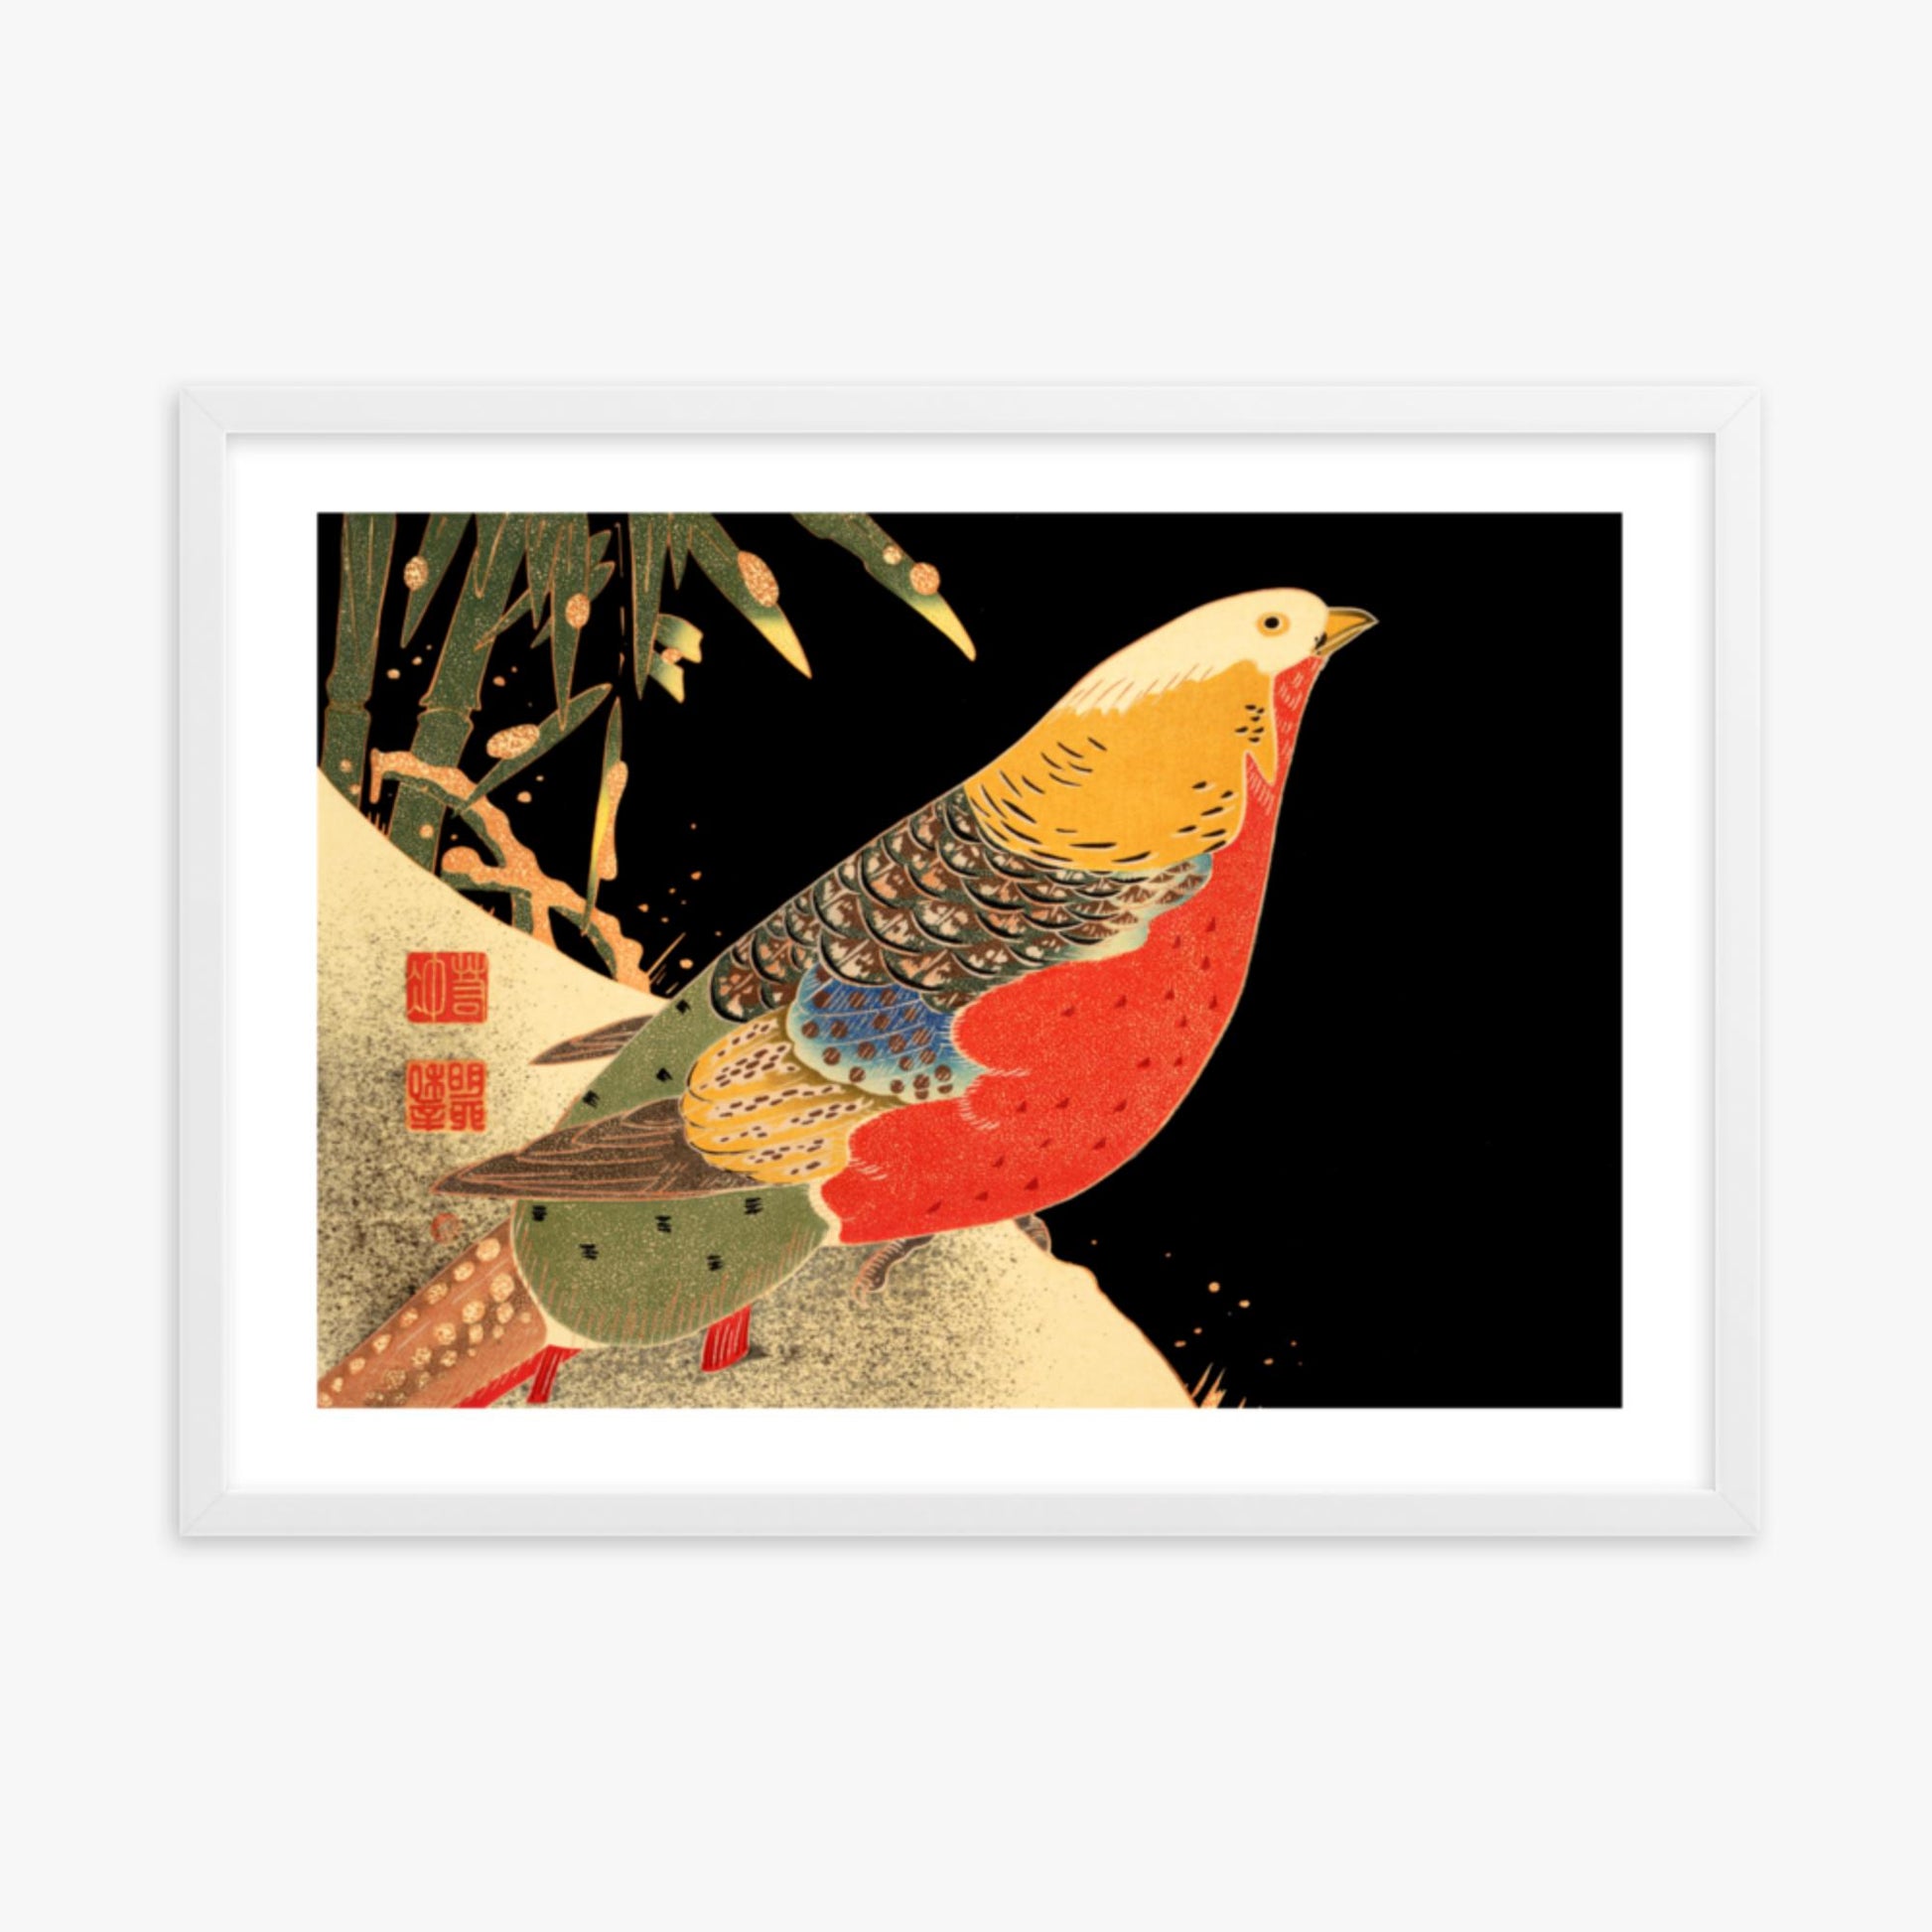 Ito Jakuchu - Golden Pheasant in the Snow 50x70 cm Poster With White Frame